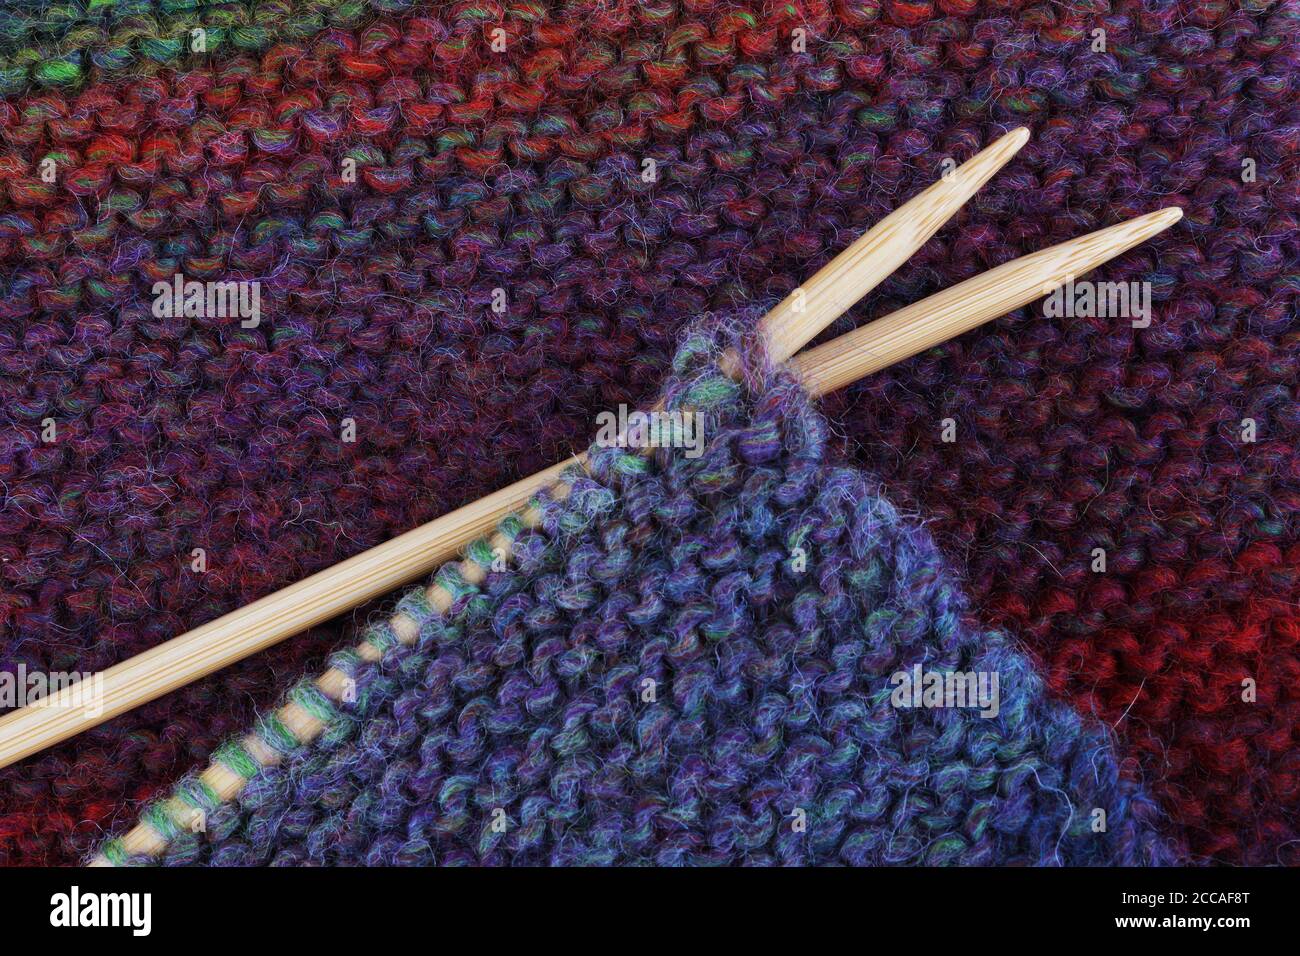 Knitting with wooden needles and colorful wool yarn Stock Photo